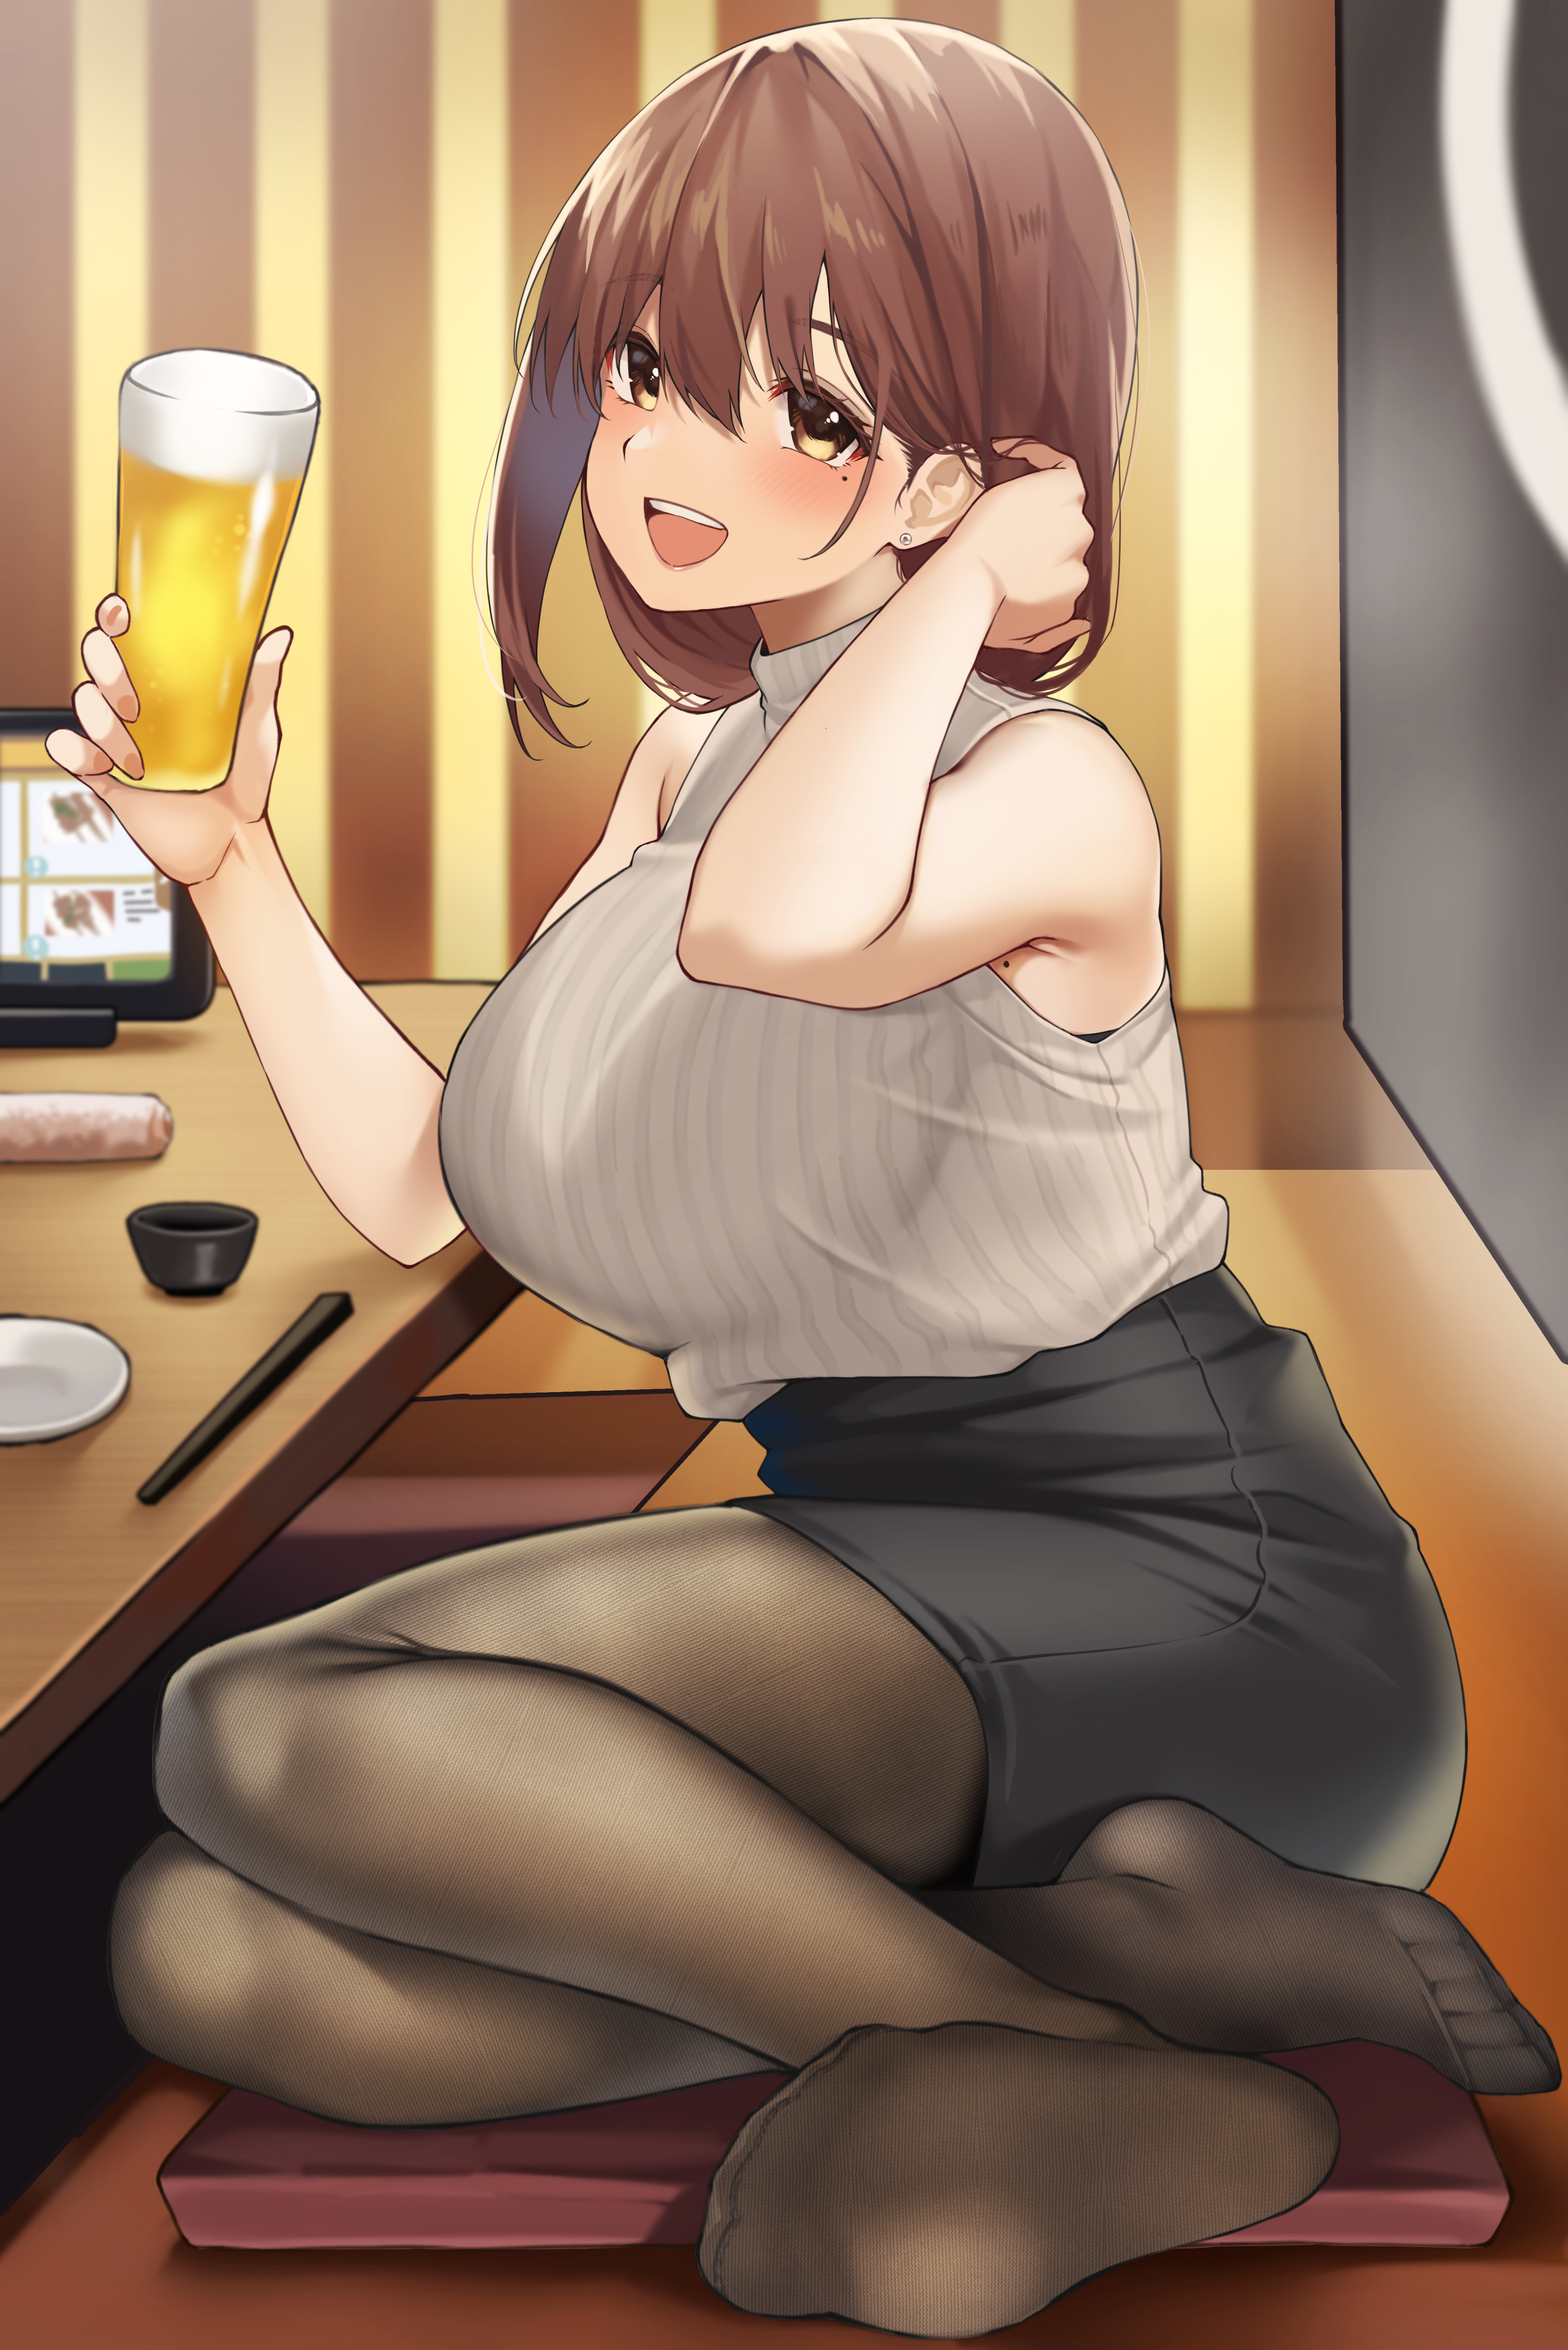 Anime 3929x5888 anime anime girls original characters solo artwork digital art fan art huge breasts beer brunette looking at viewer smiling white blouse black skirts pantyhose